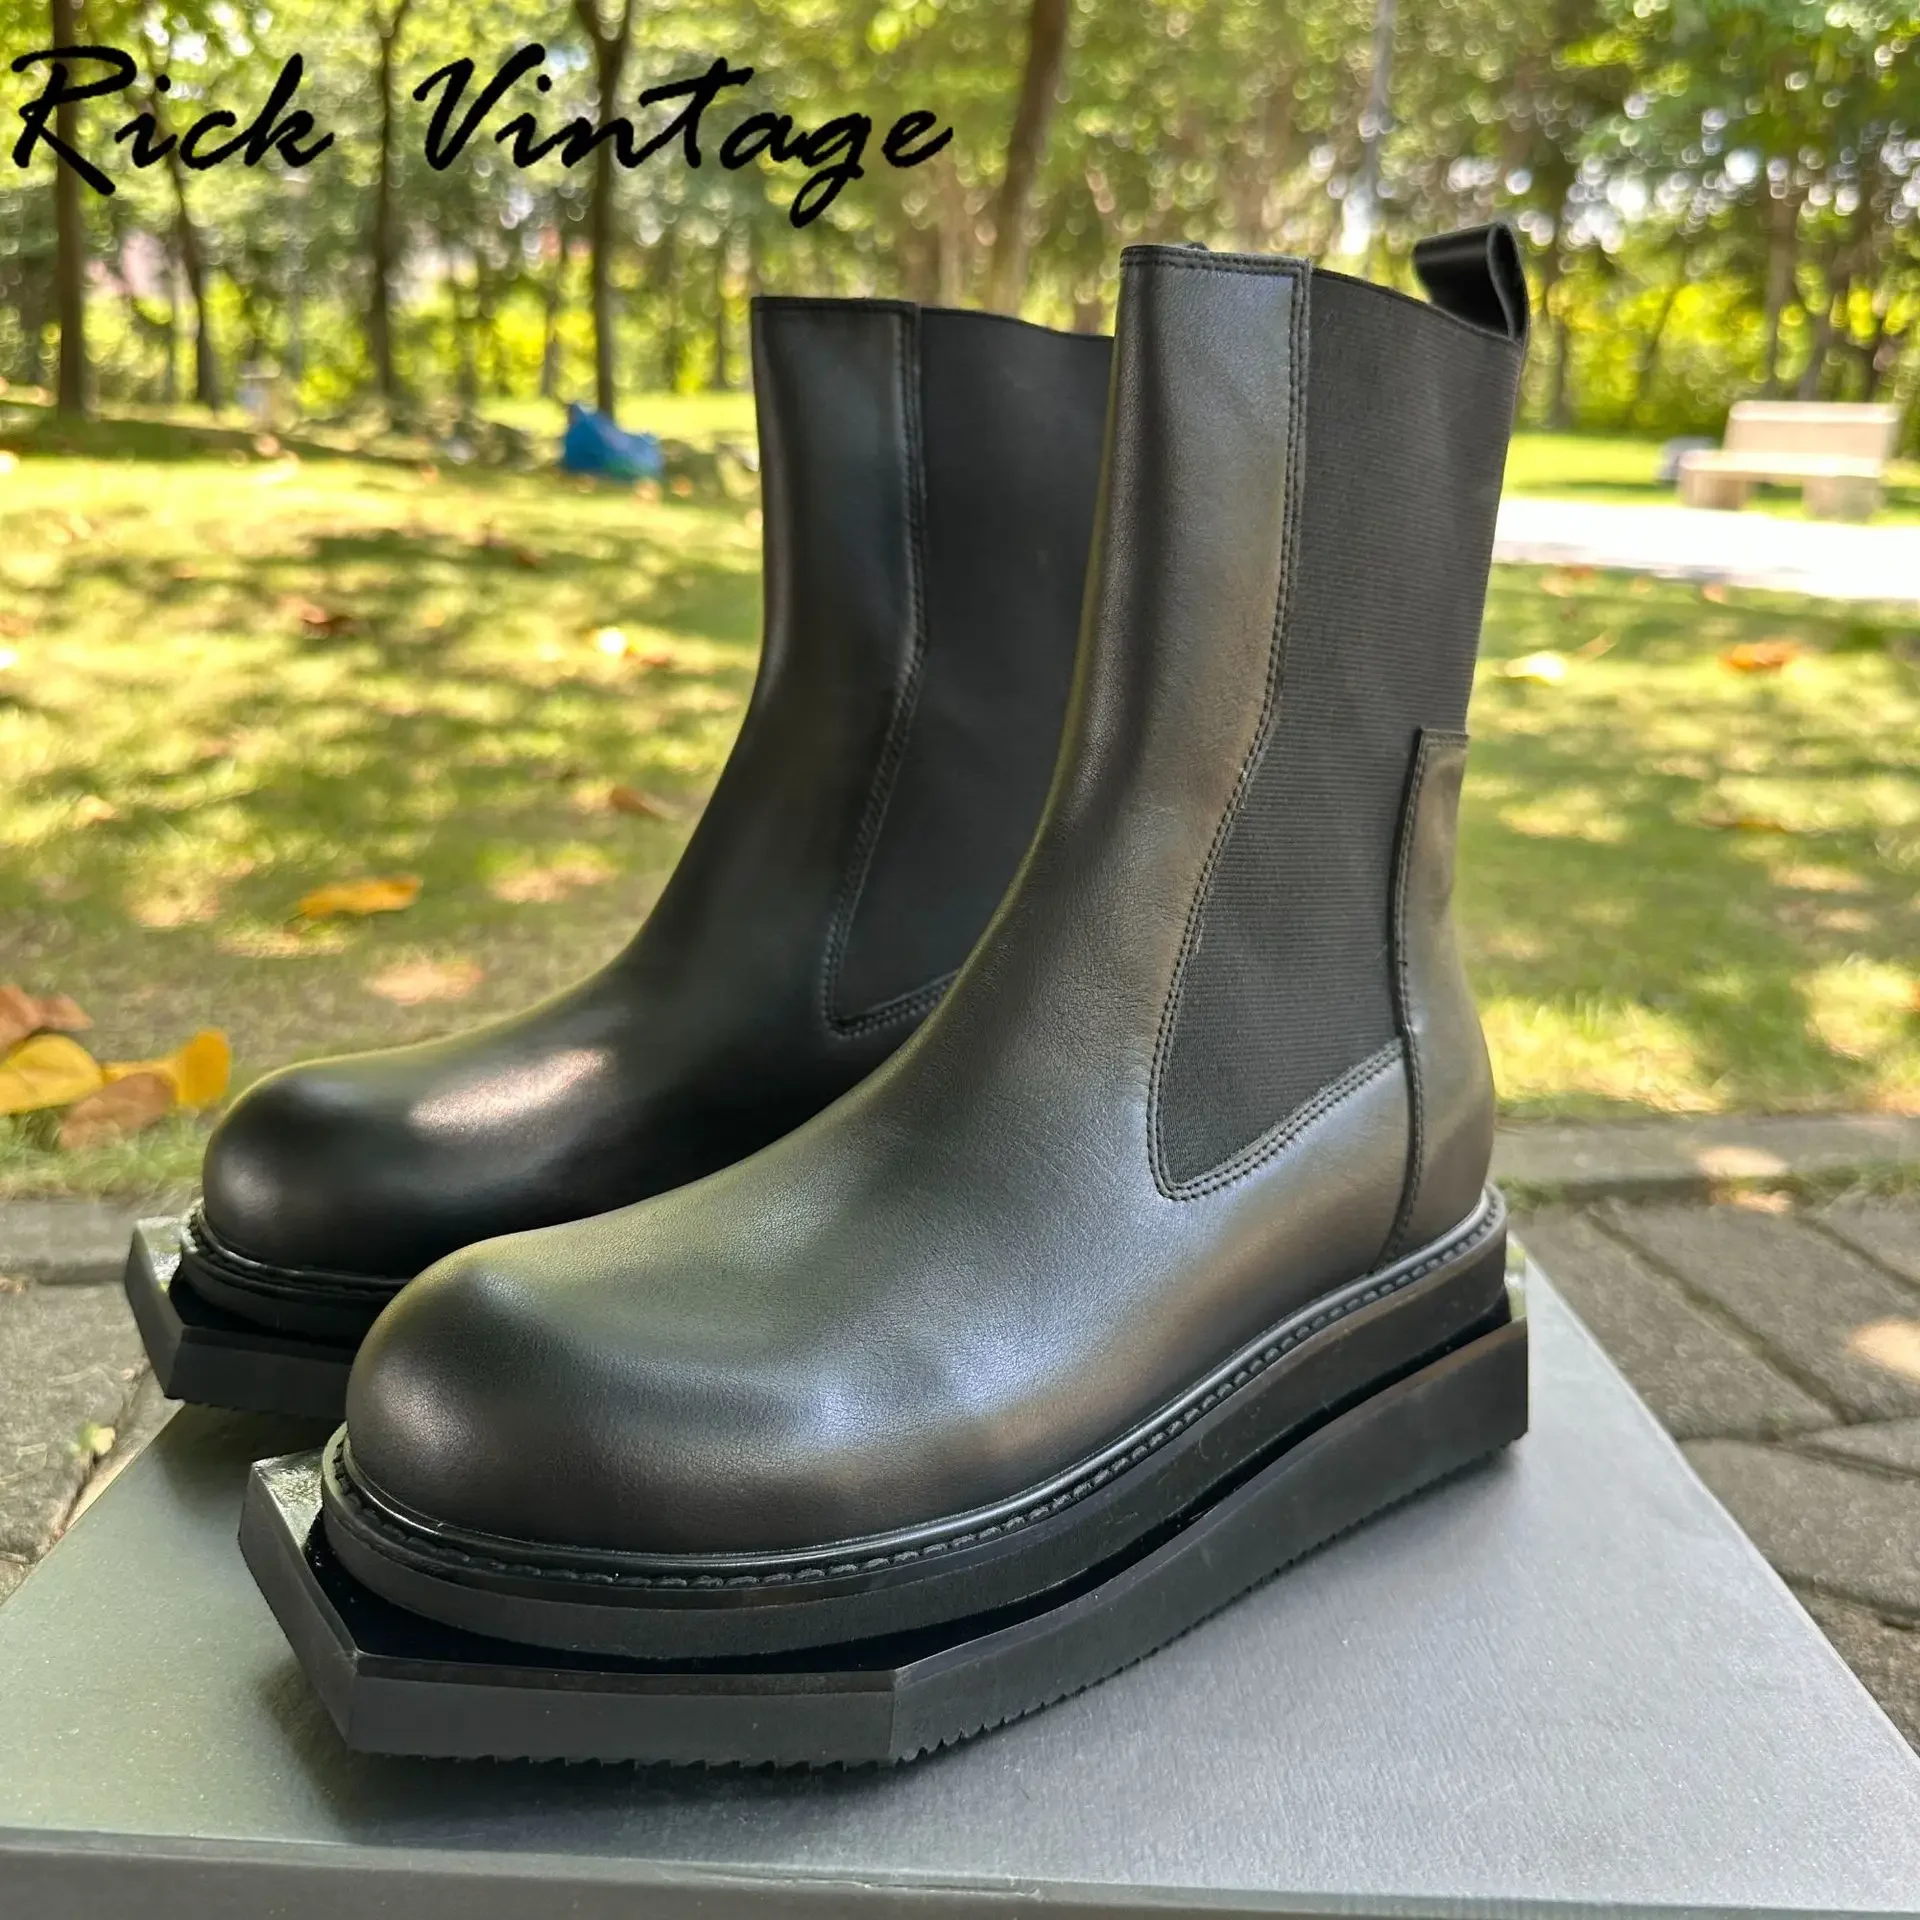 

Rick Vintage Luxury Design Men Chelsea Boots Men Shoes Thick Sole Real Leather Ankle Boots Casual Knight Shoes Motorcycle Boots